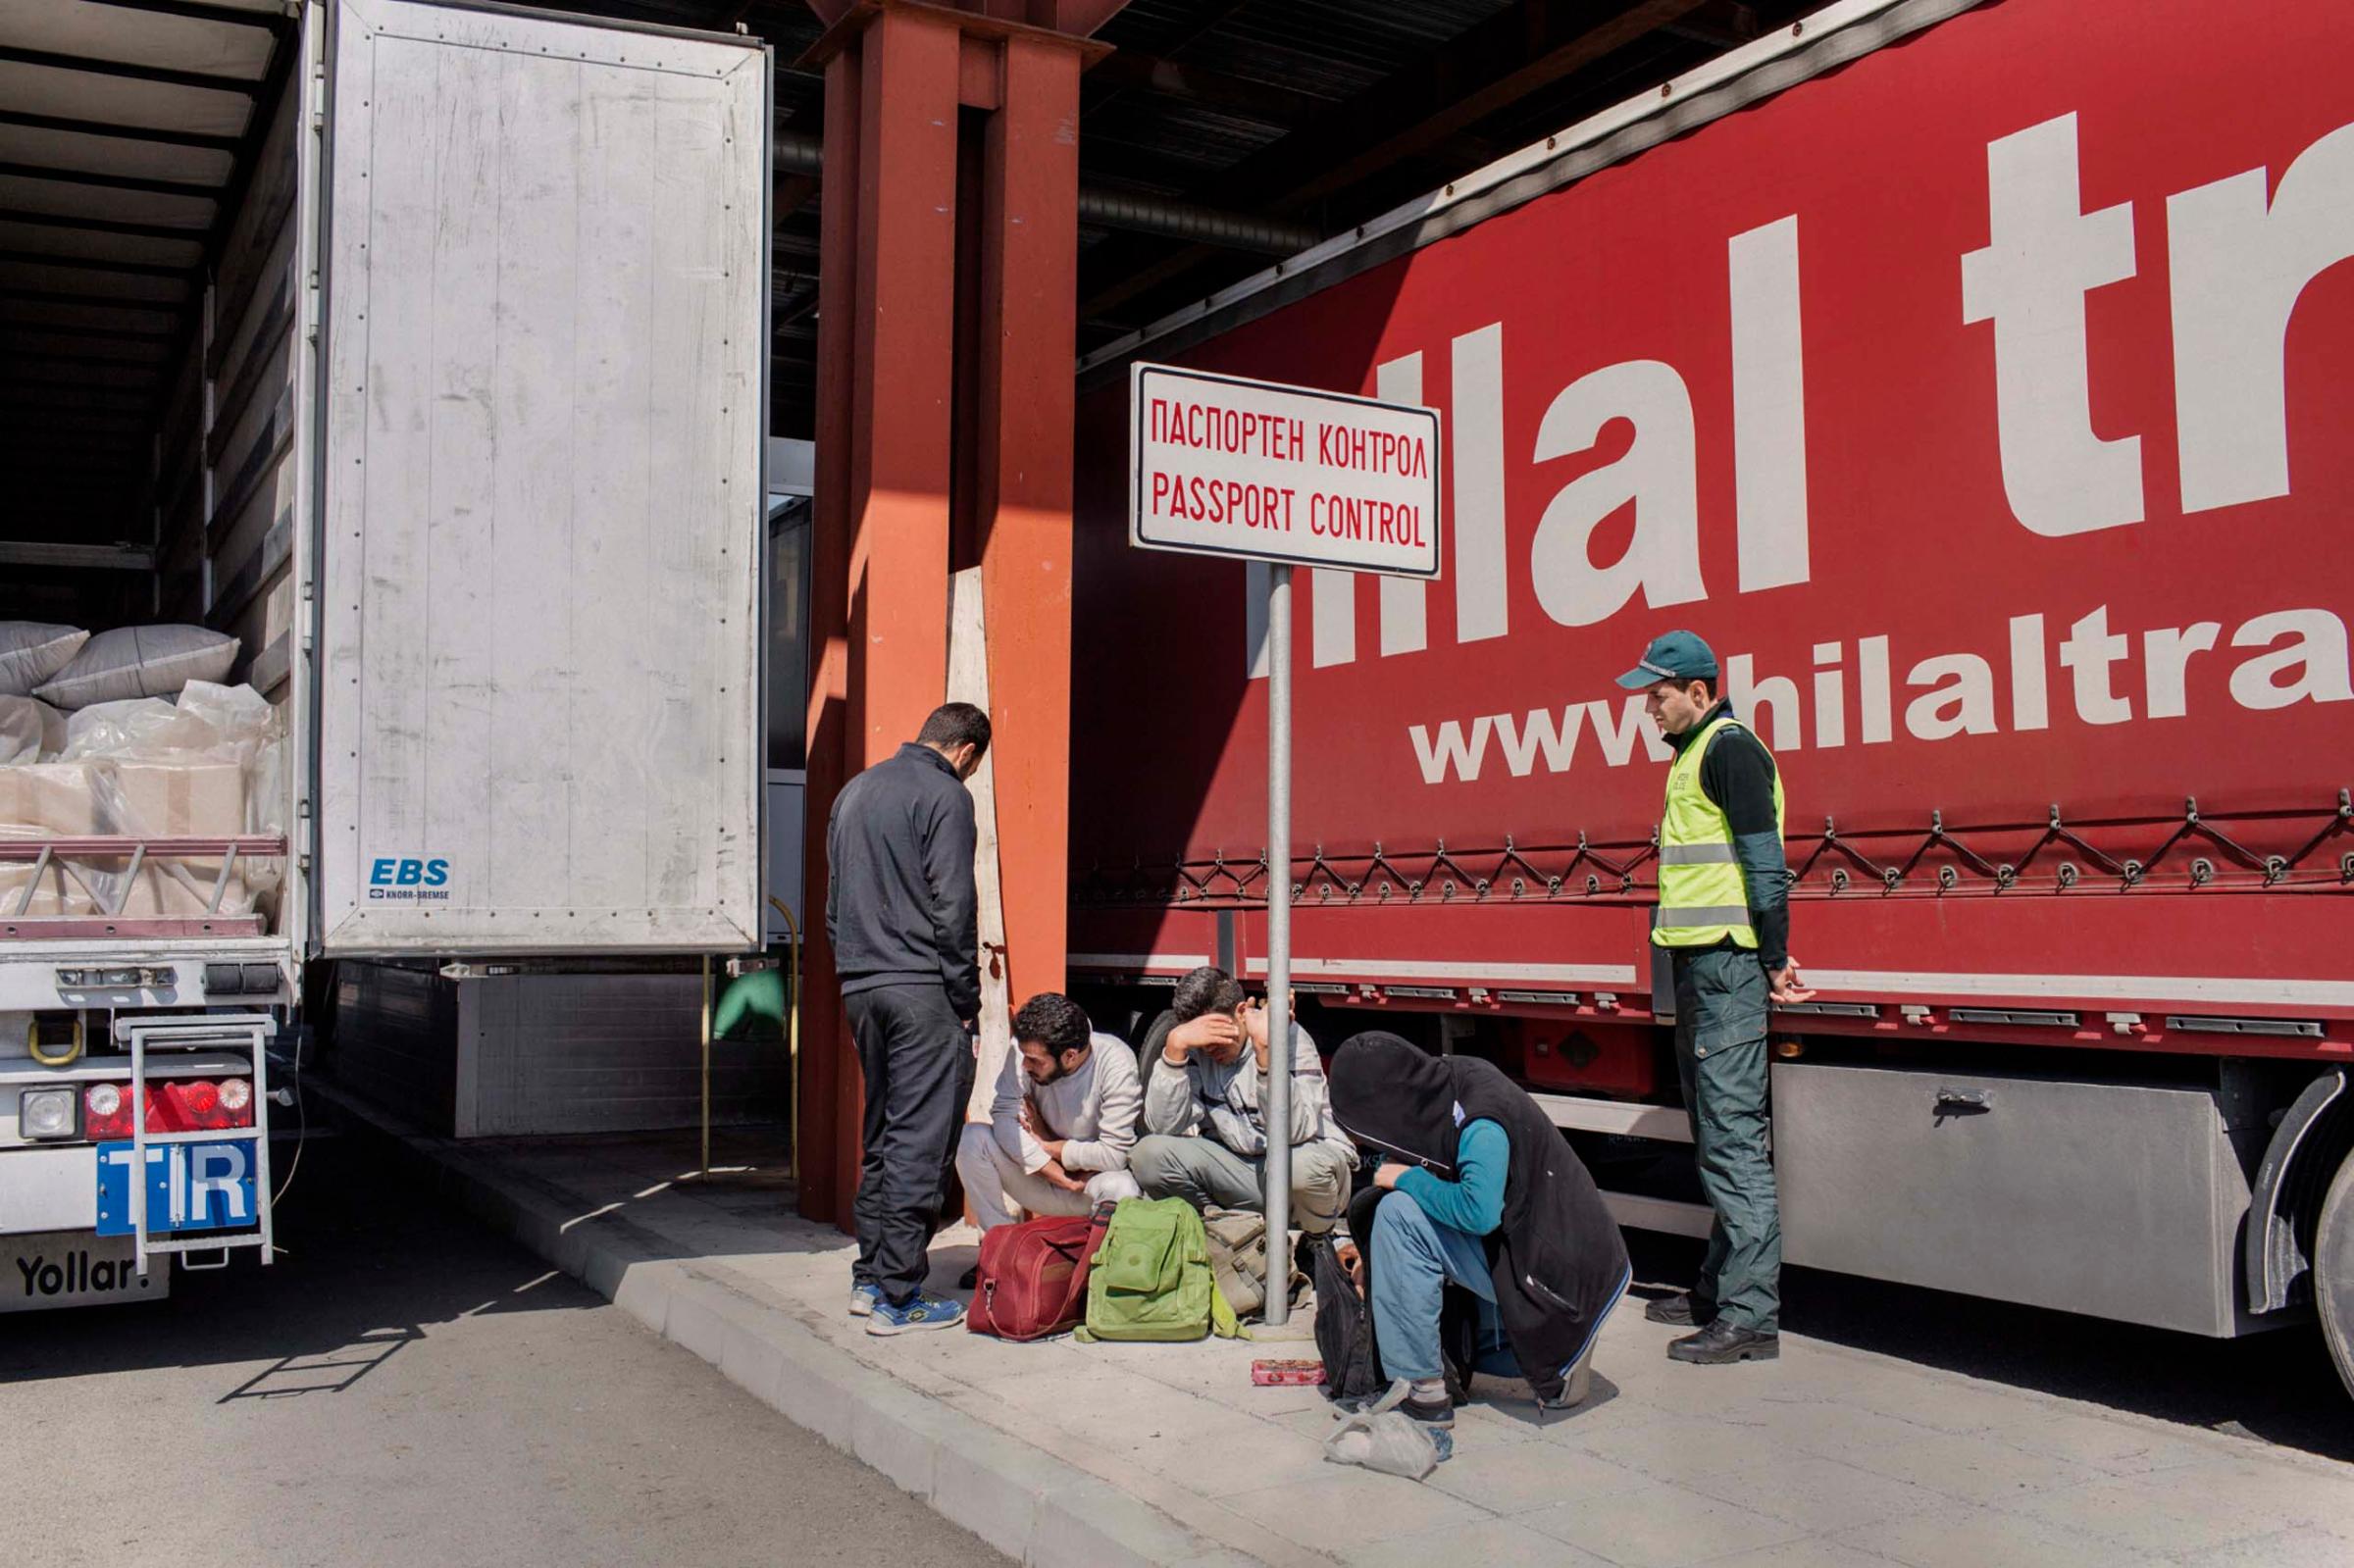 At the Bulgarian-Turkish border, a group of four Syrians are found inside a Turkish goods truck during border controls, 2014. Trucks are one of the most frequently used means of entering the European Union illegally.